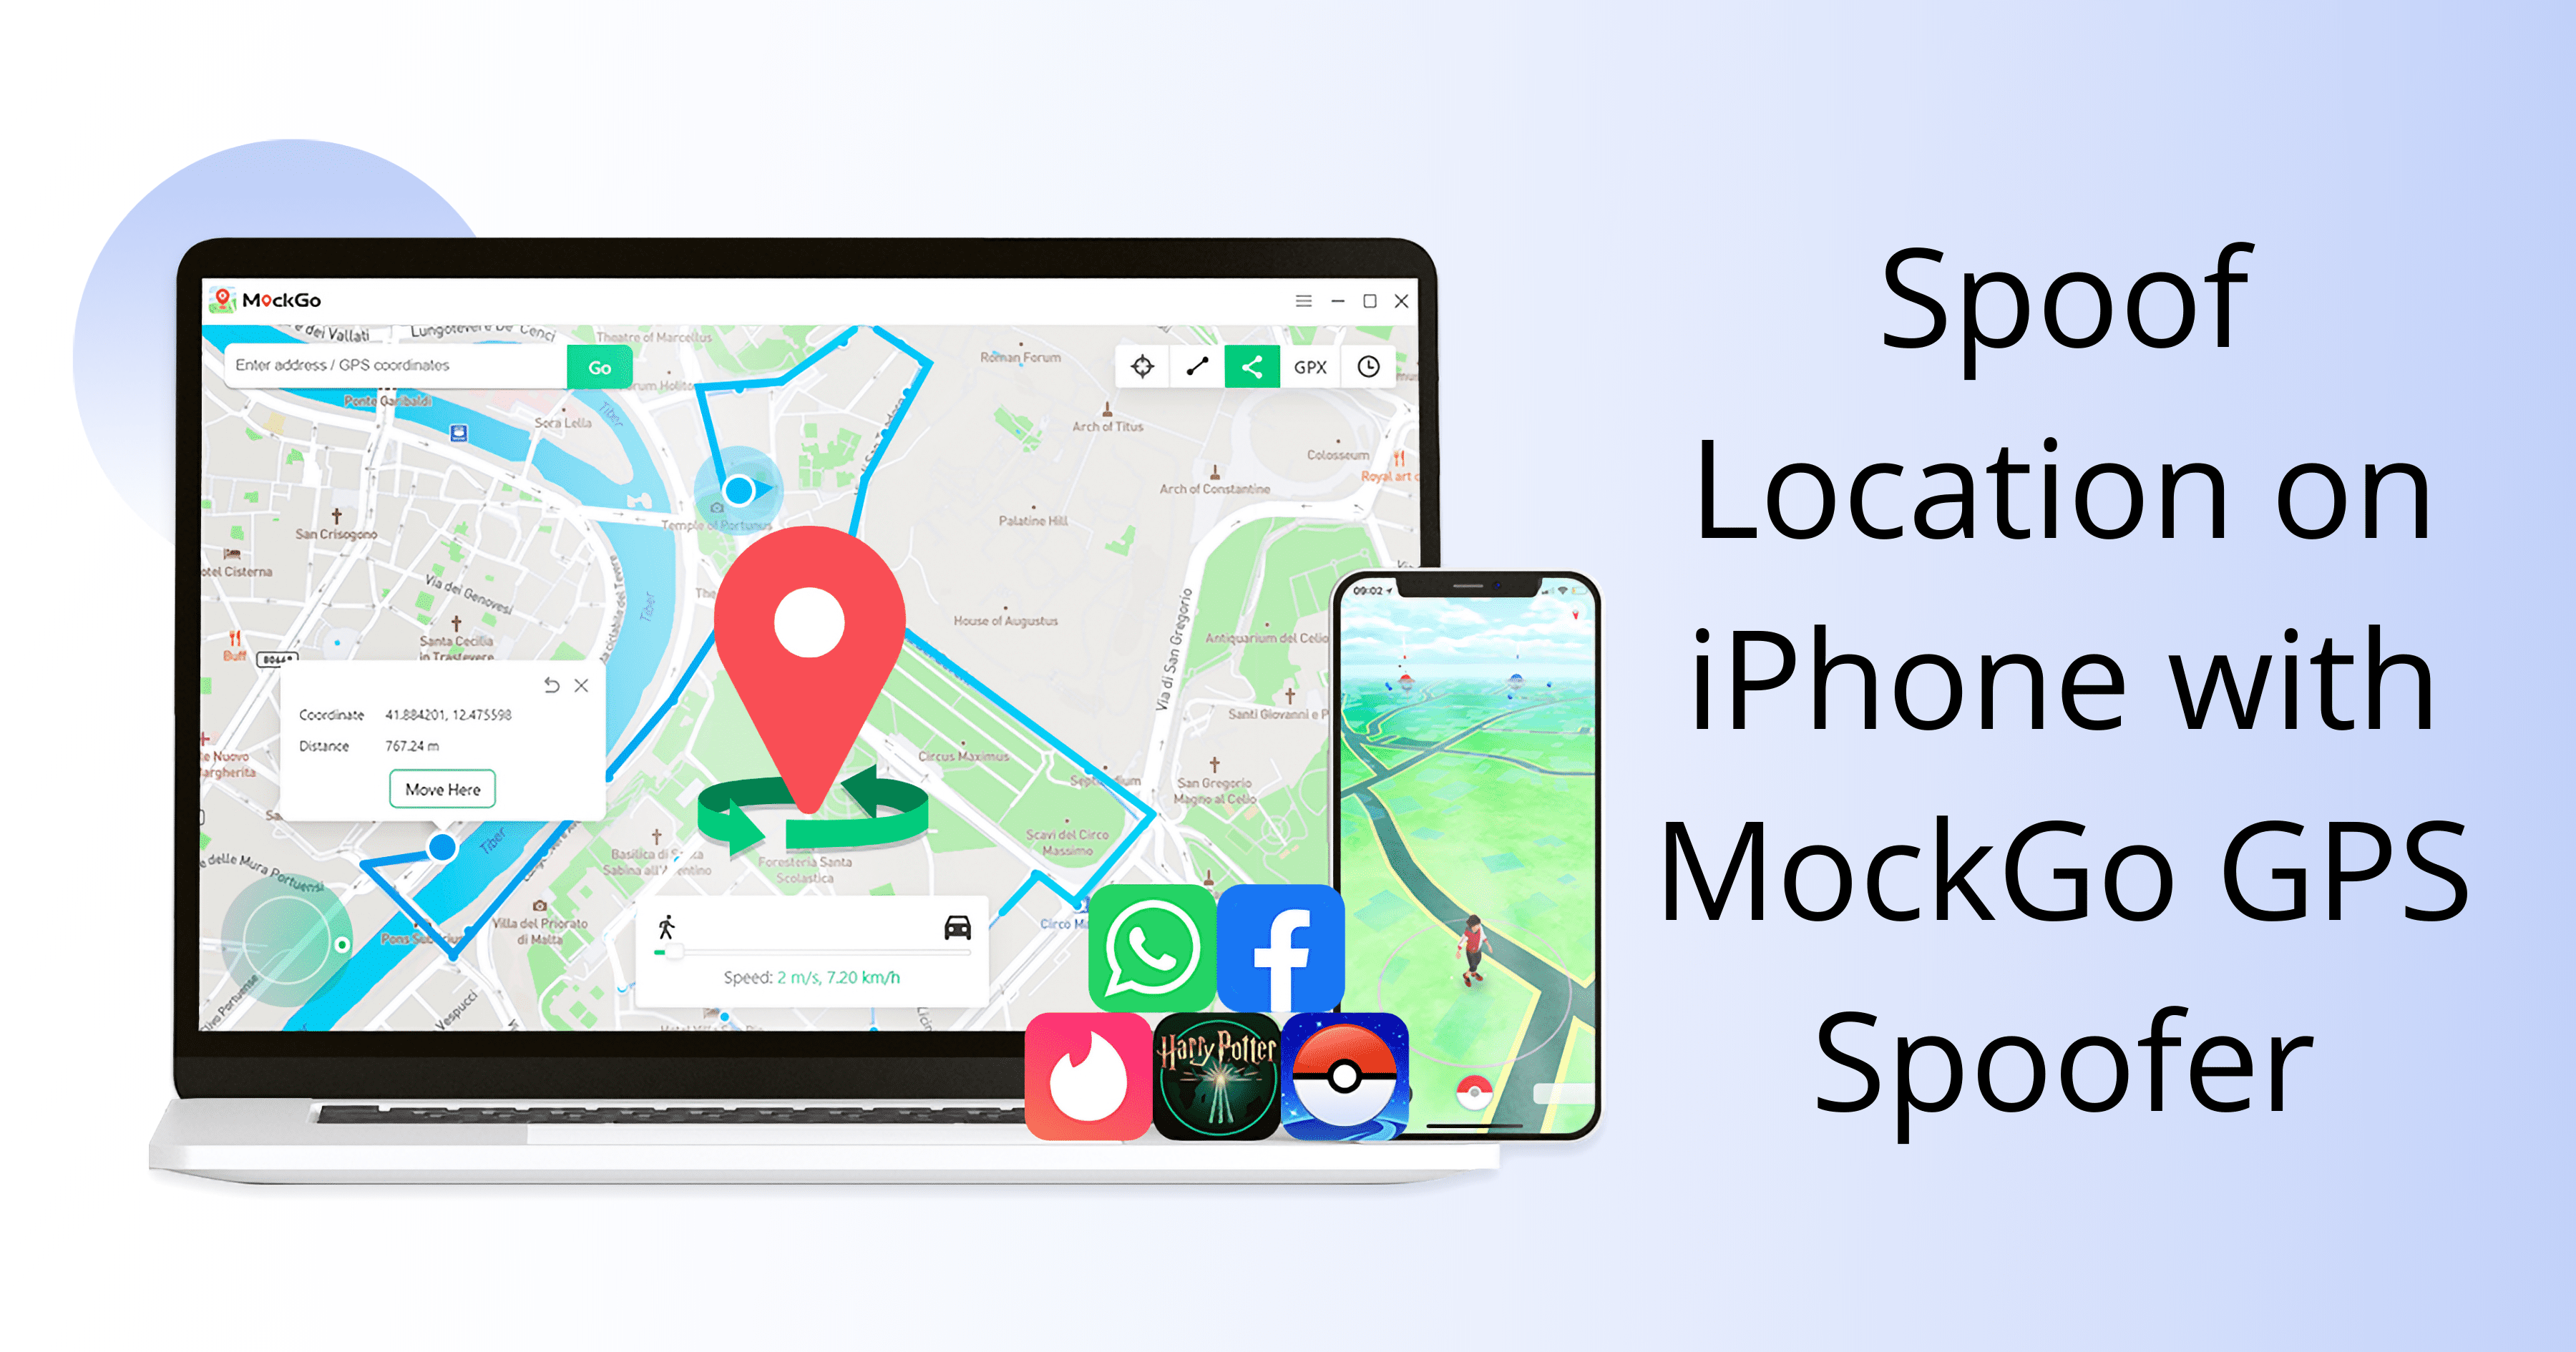 Spoof location on iPhone, iPad with MockGo GPS Spoofer for Mac, PC